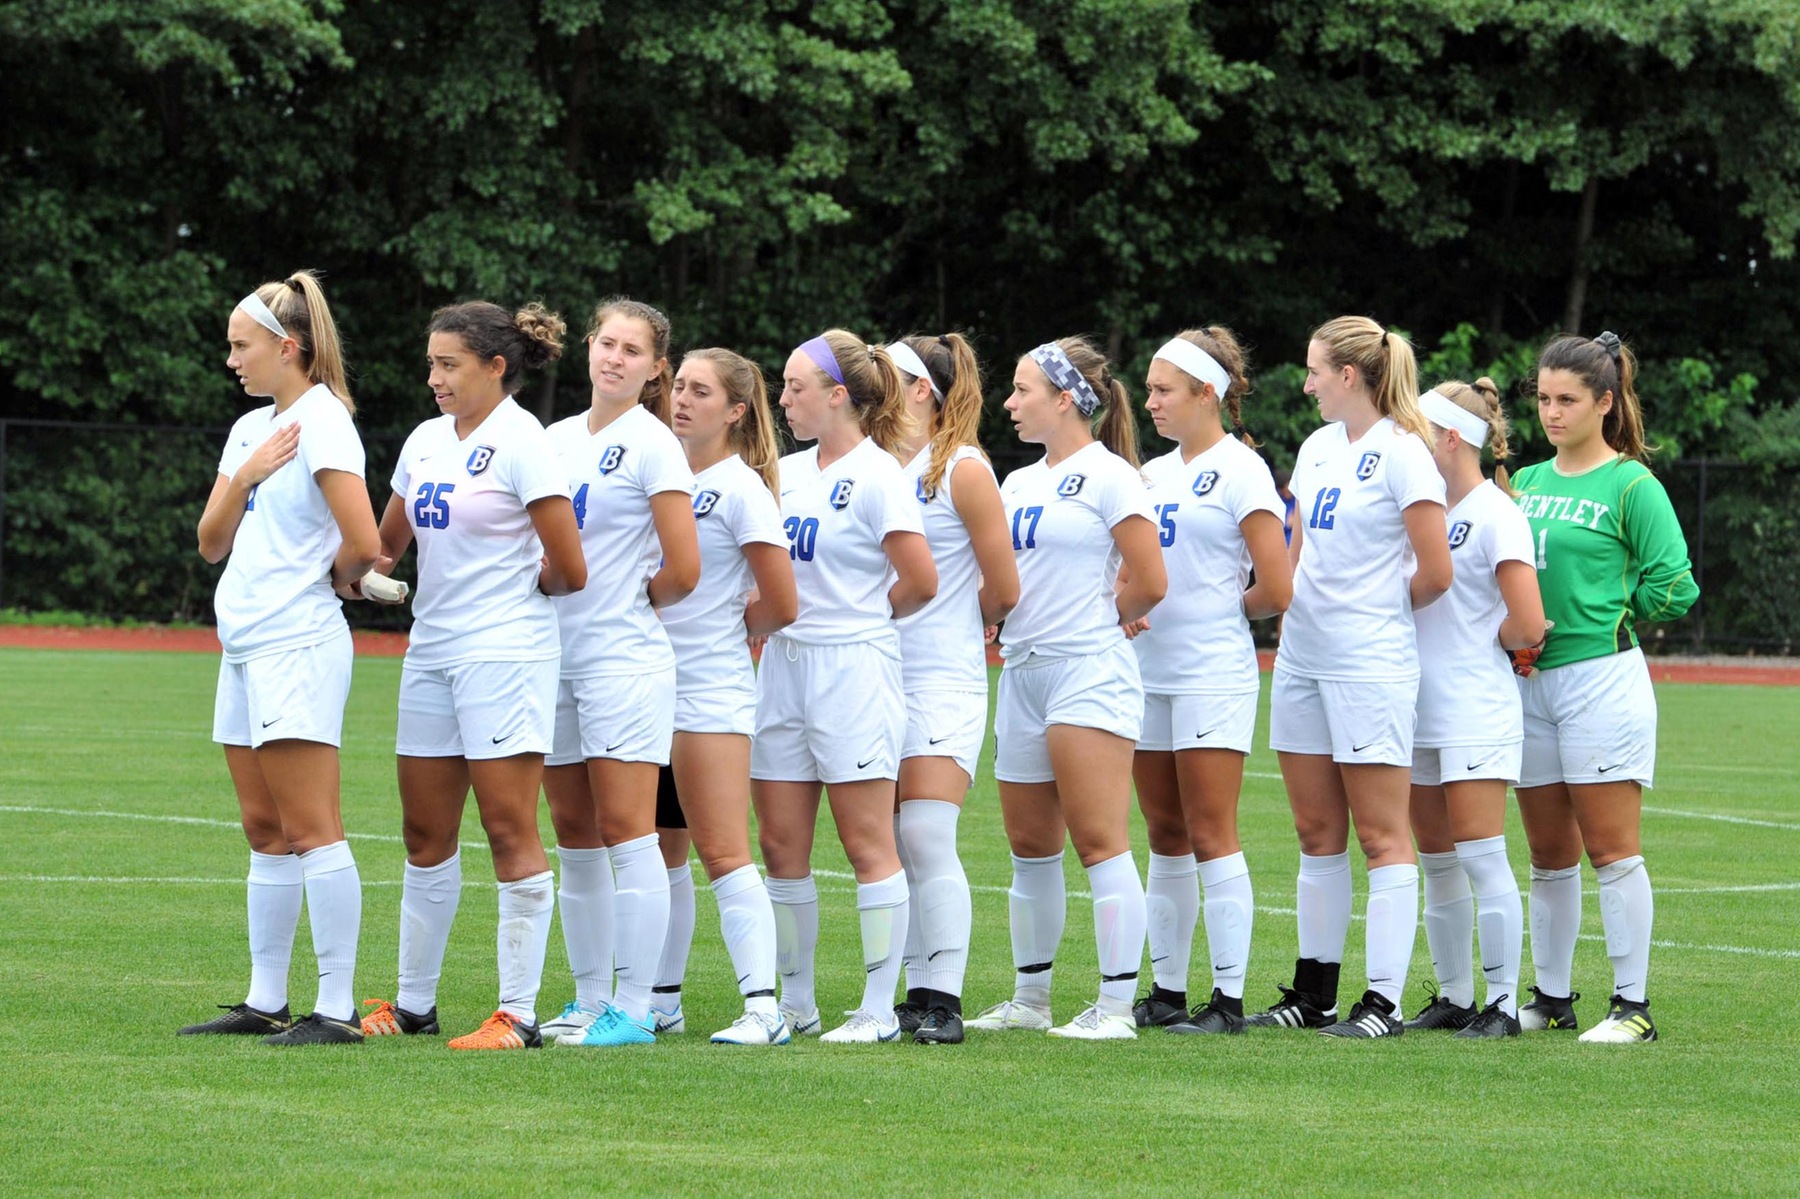 Wednesday’s Bentley Women’s Soccer Game vs. SNHU to Air on Fox College Sports